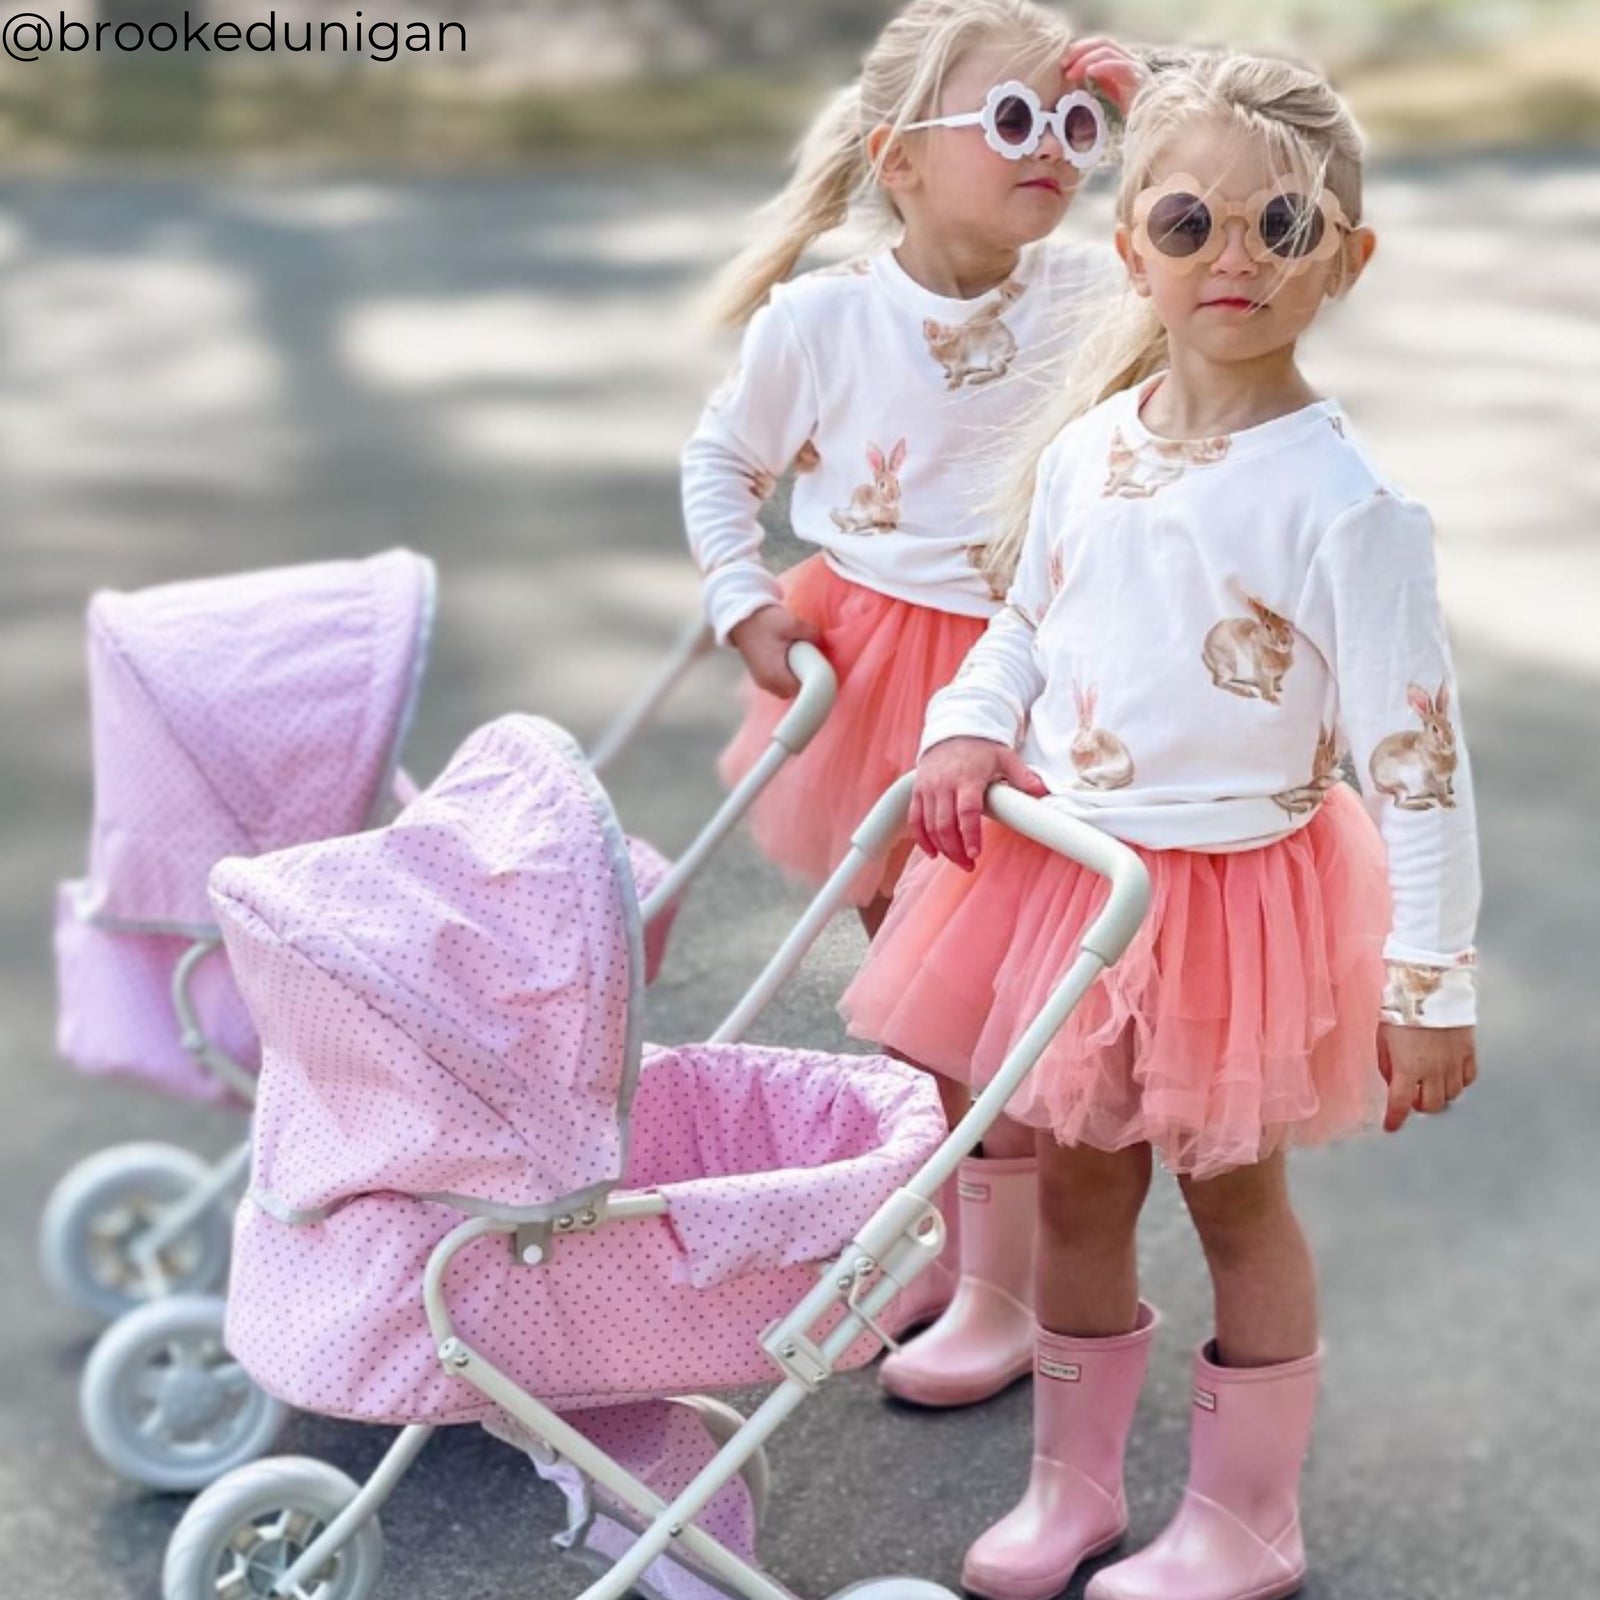 Two little girls in pink tutus and sunglasses pushing doll strollers on a street.